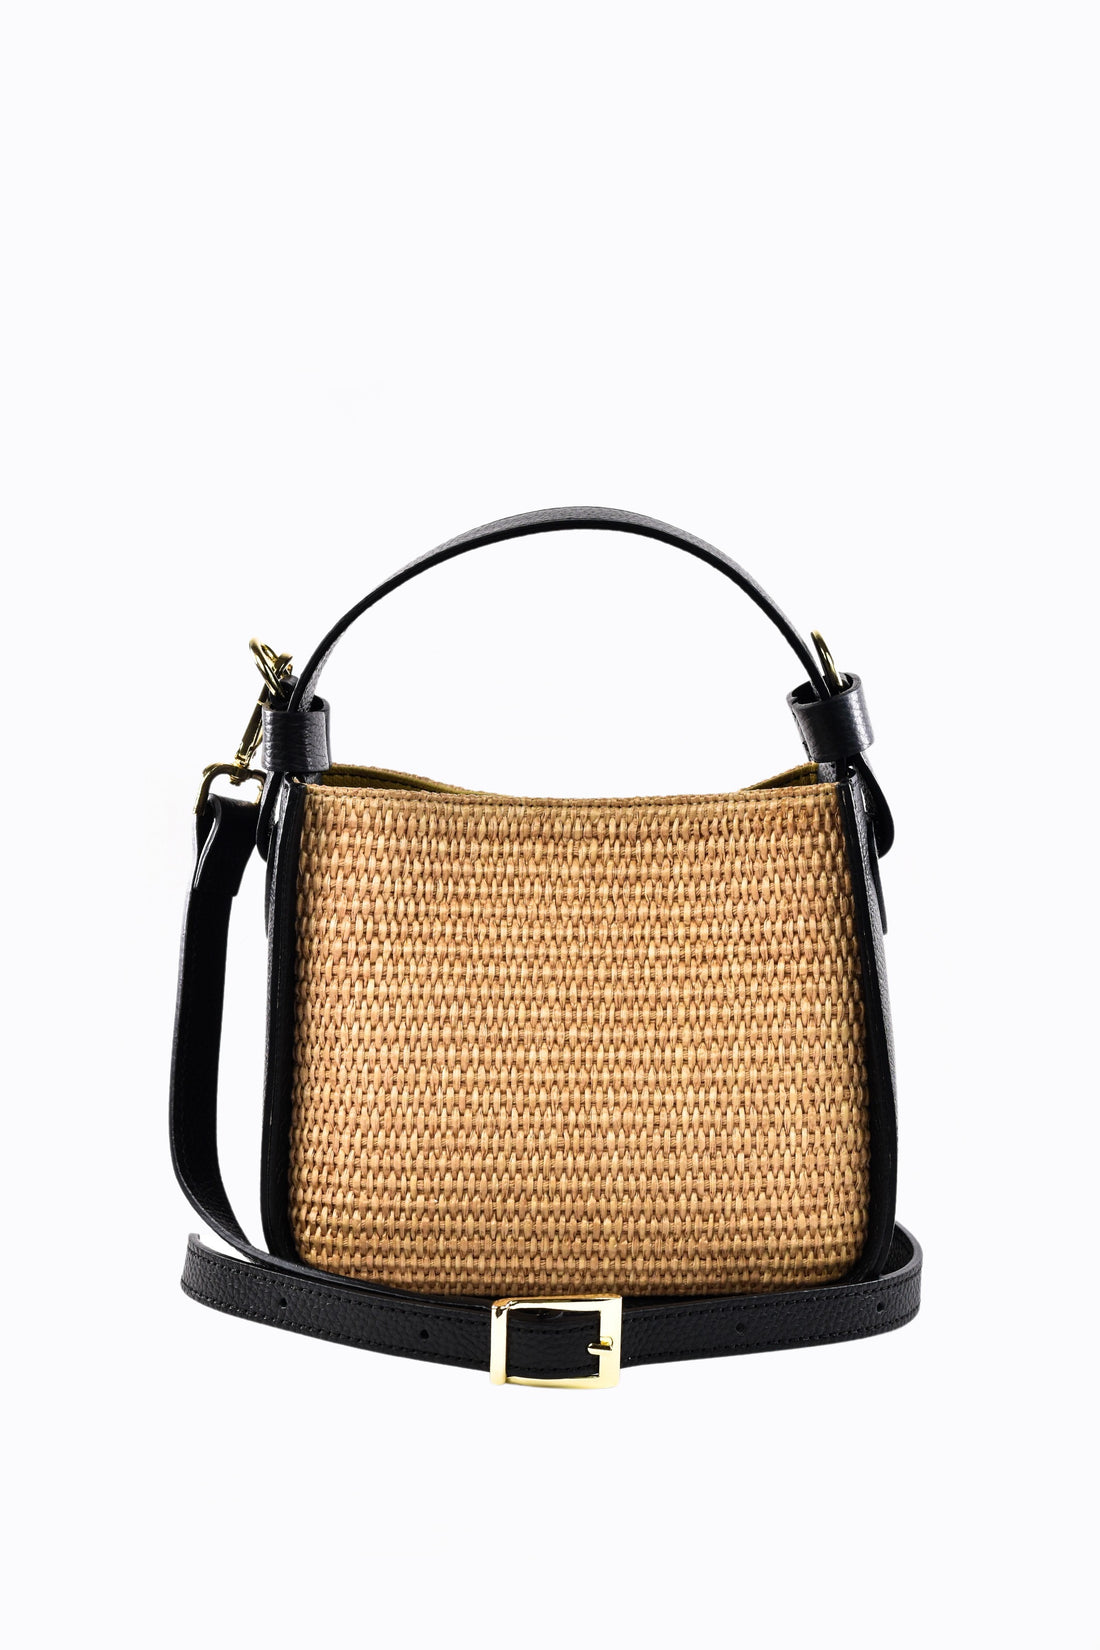 Kendall bag in Beige Dollar leather